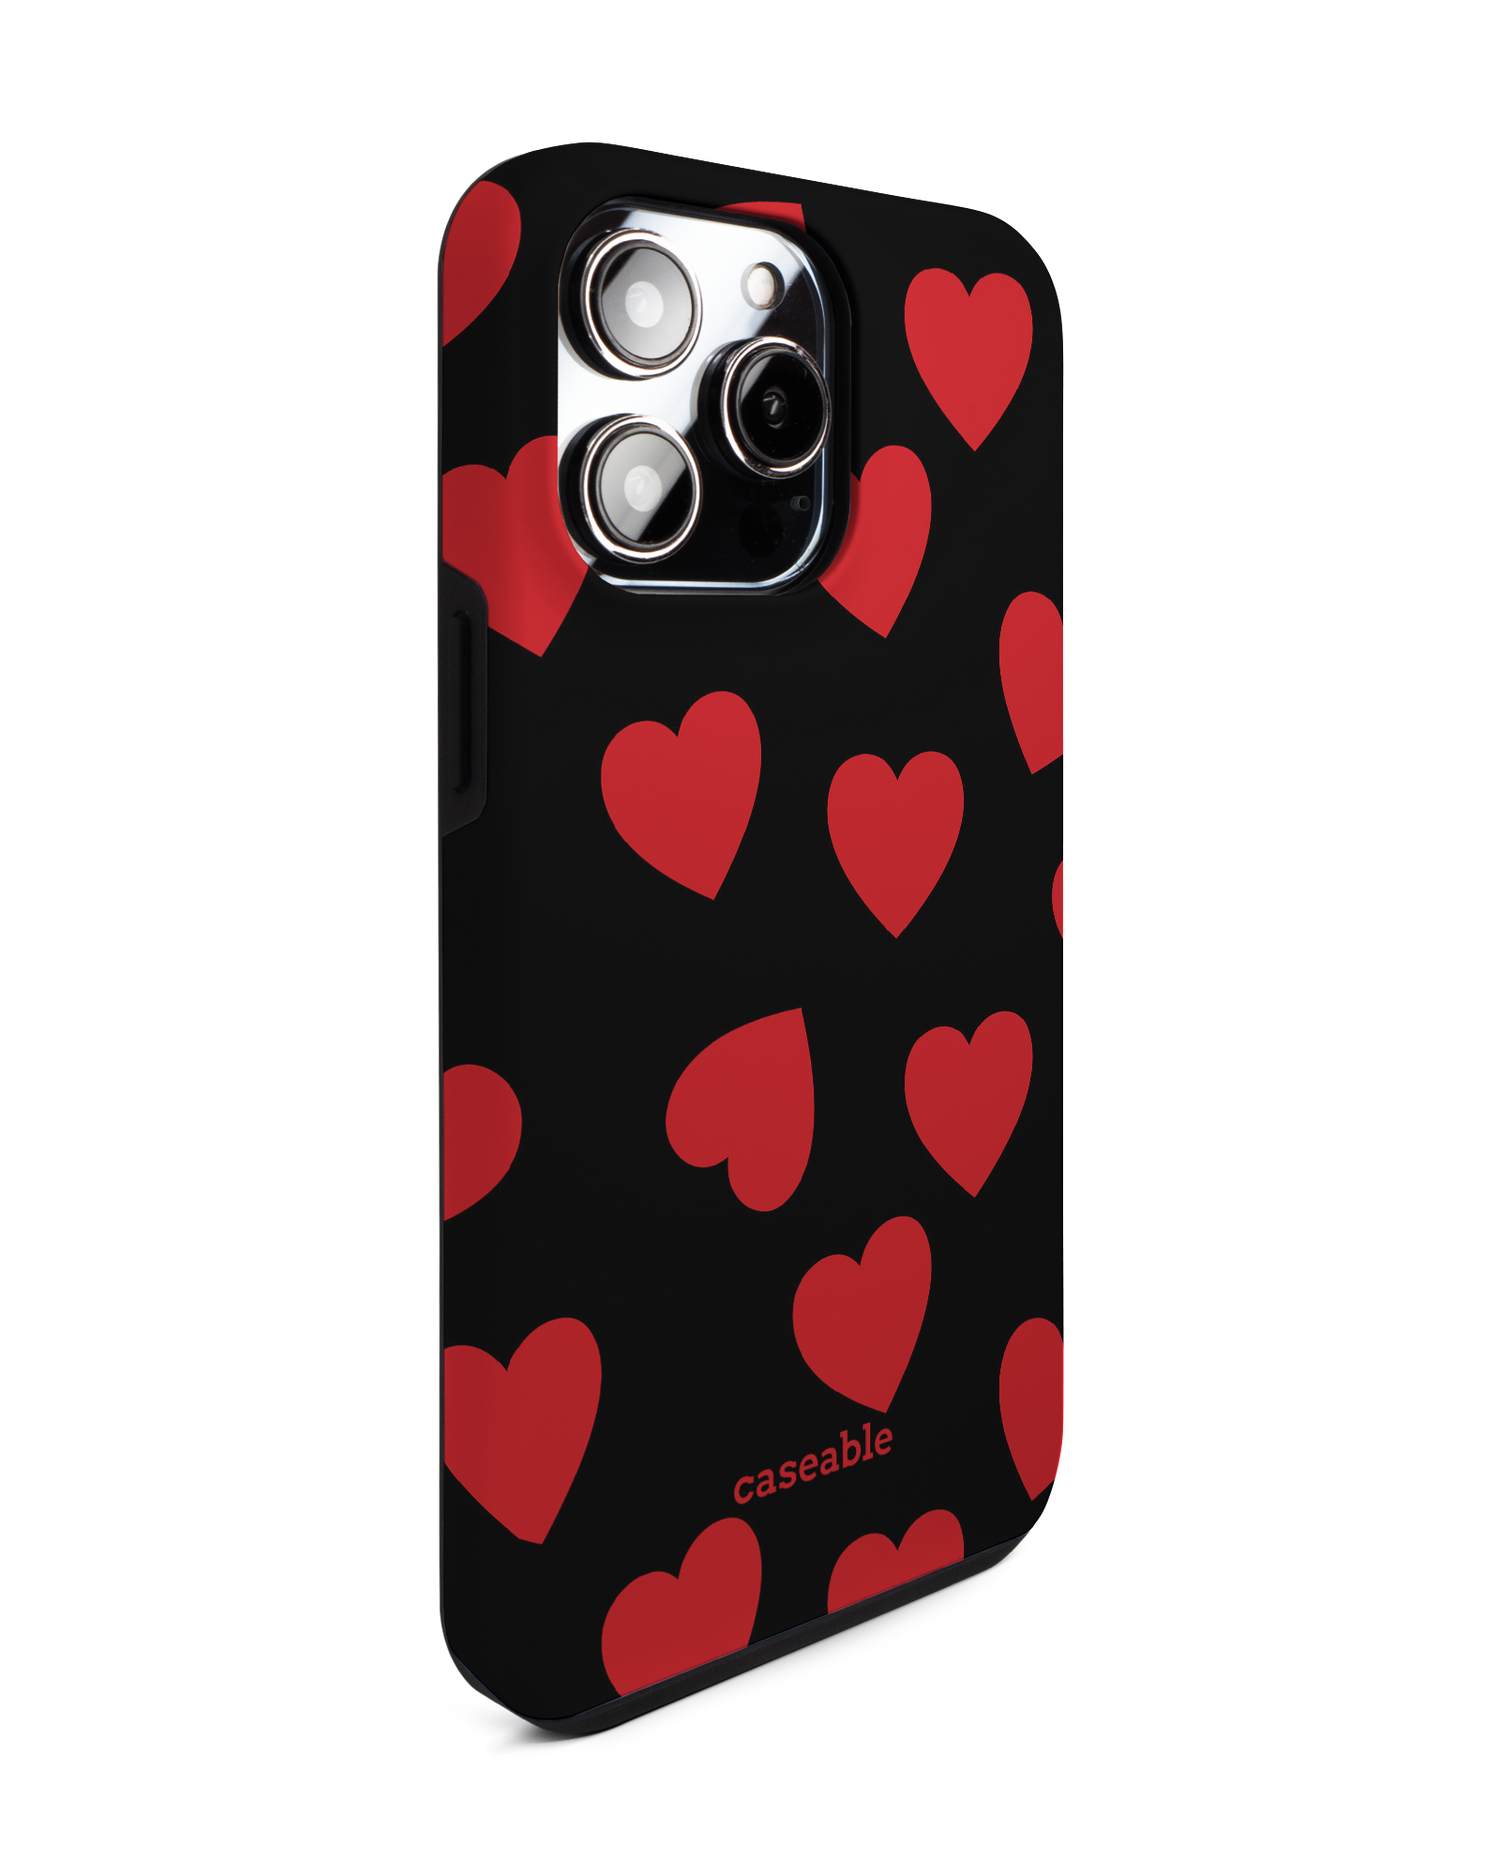 Repeating Hearts Premium Phone Case for Apple iPhone 14 Pro Max: View from the left side